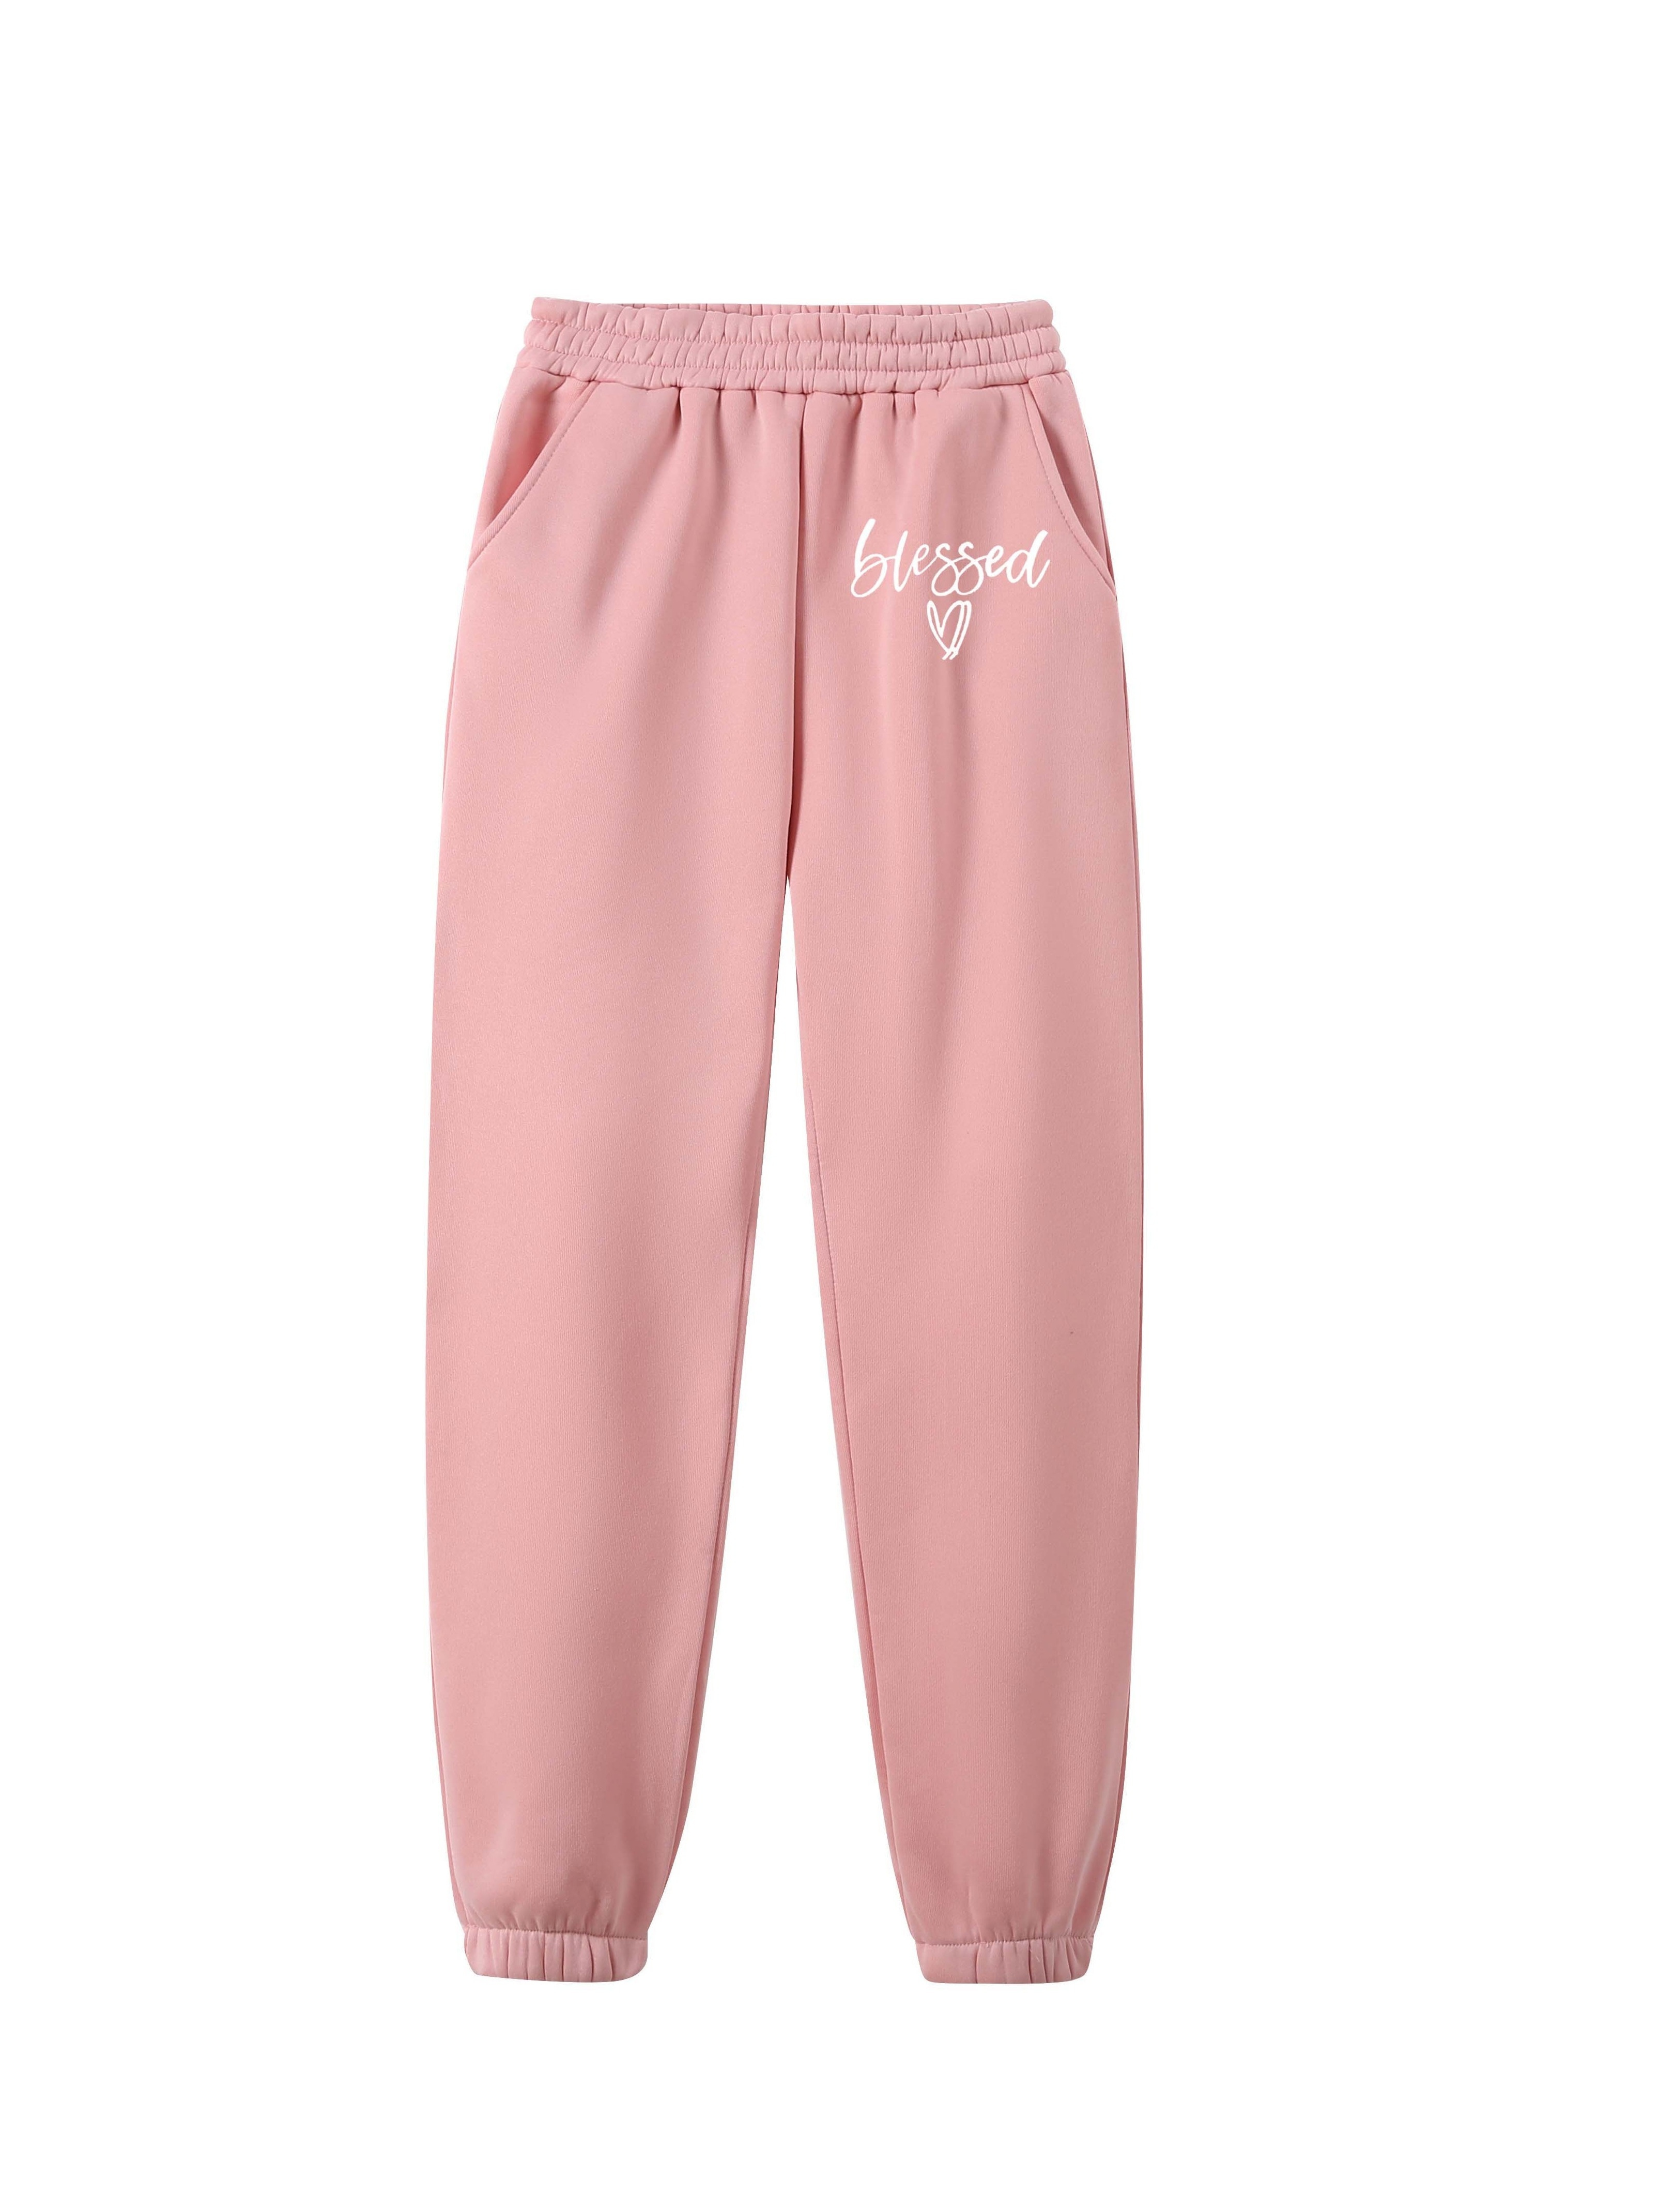 Love Thy Pink Graphic Blessings Sweatpants Women's Size XL New